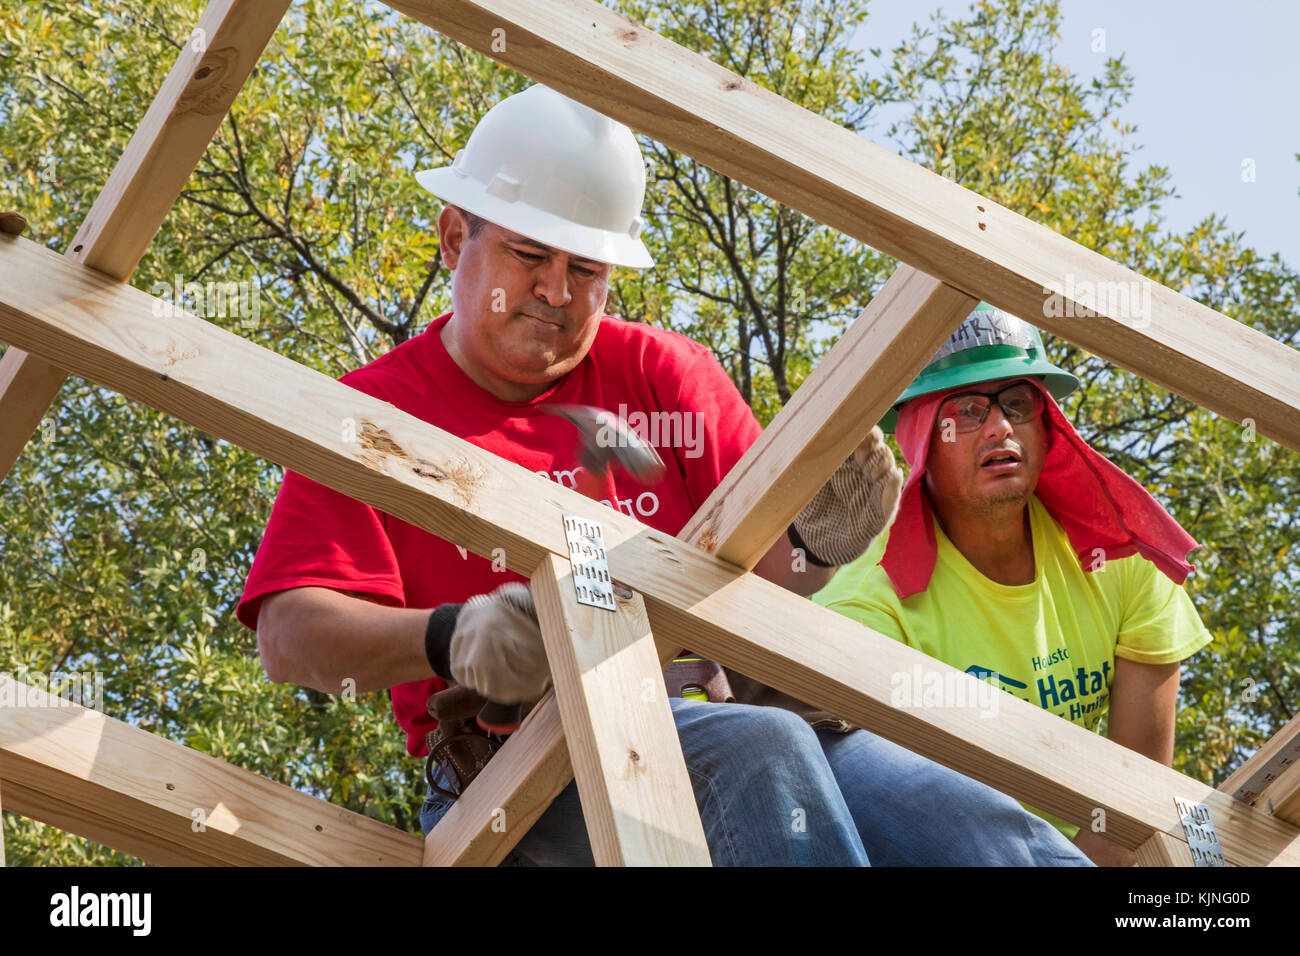 Houston, Texas - Volunteers from Wells Fargo Bank help build a Habitat for Humanity house for a low-income family. The need for affordable housing in  Stock Photo